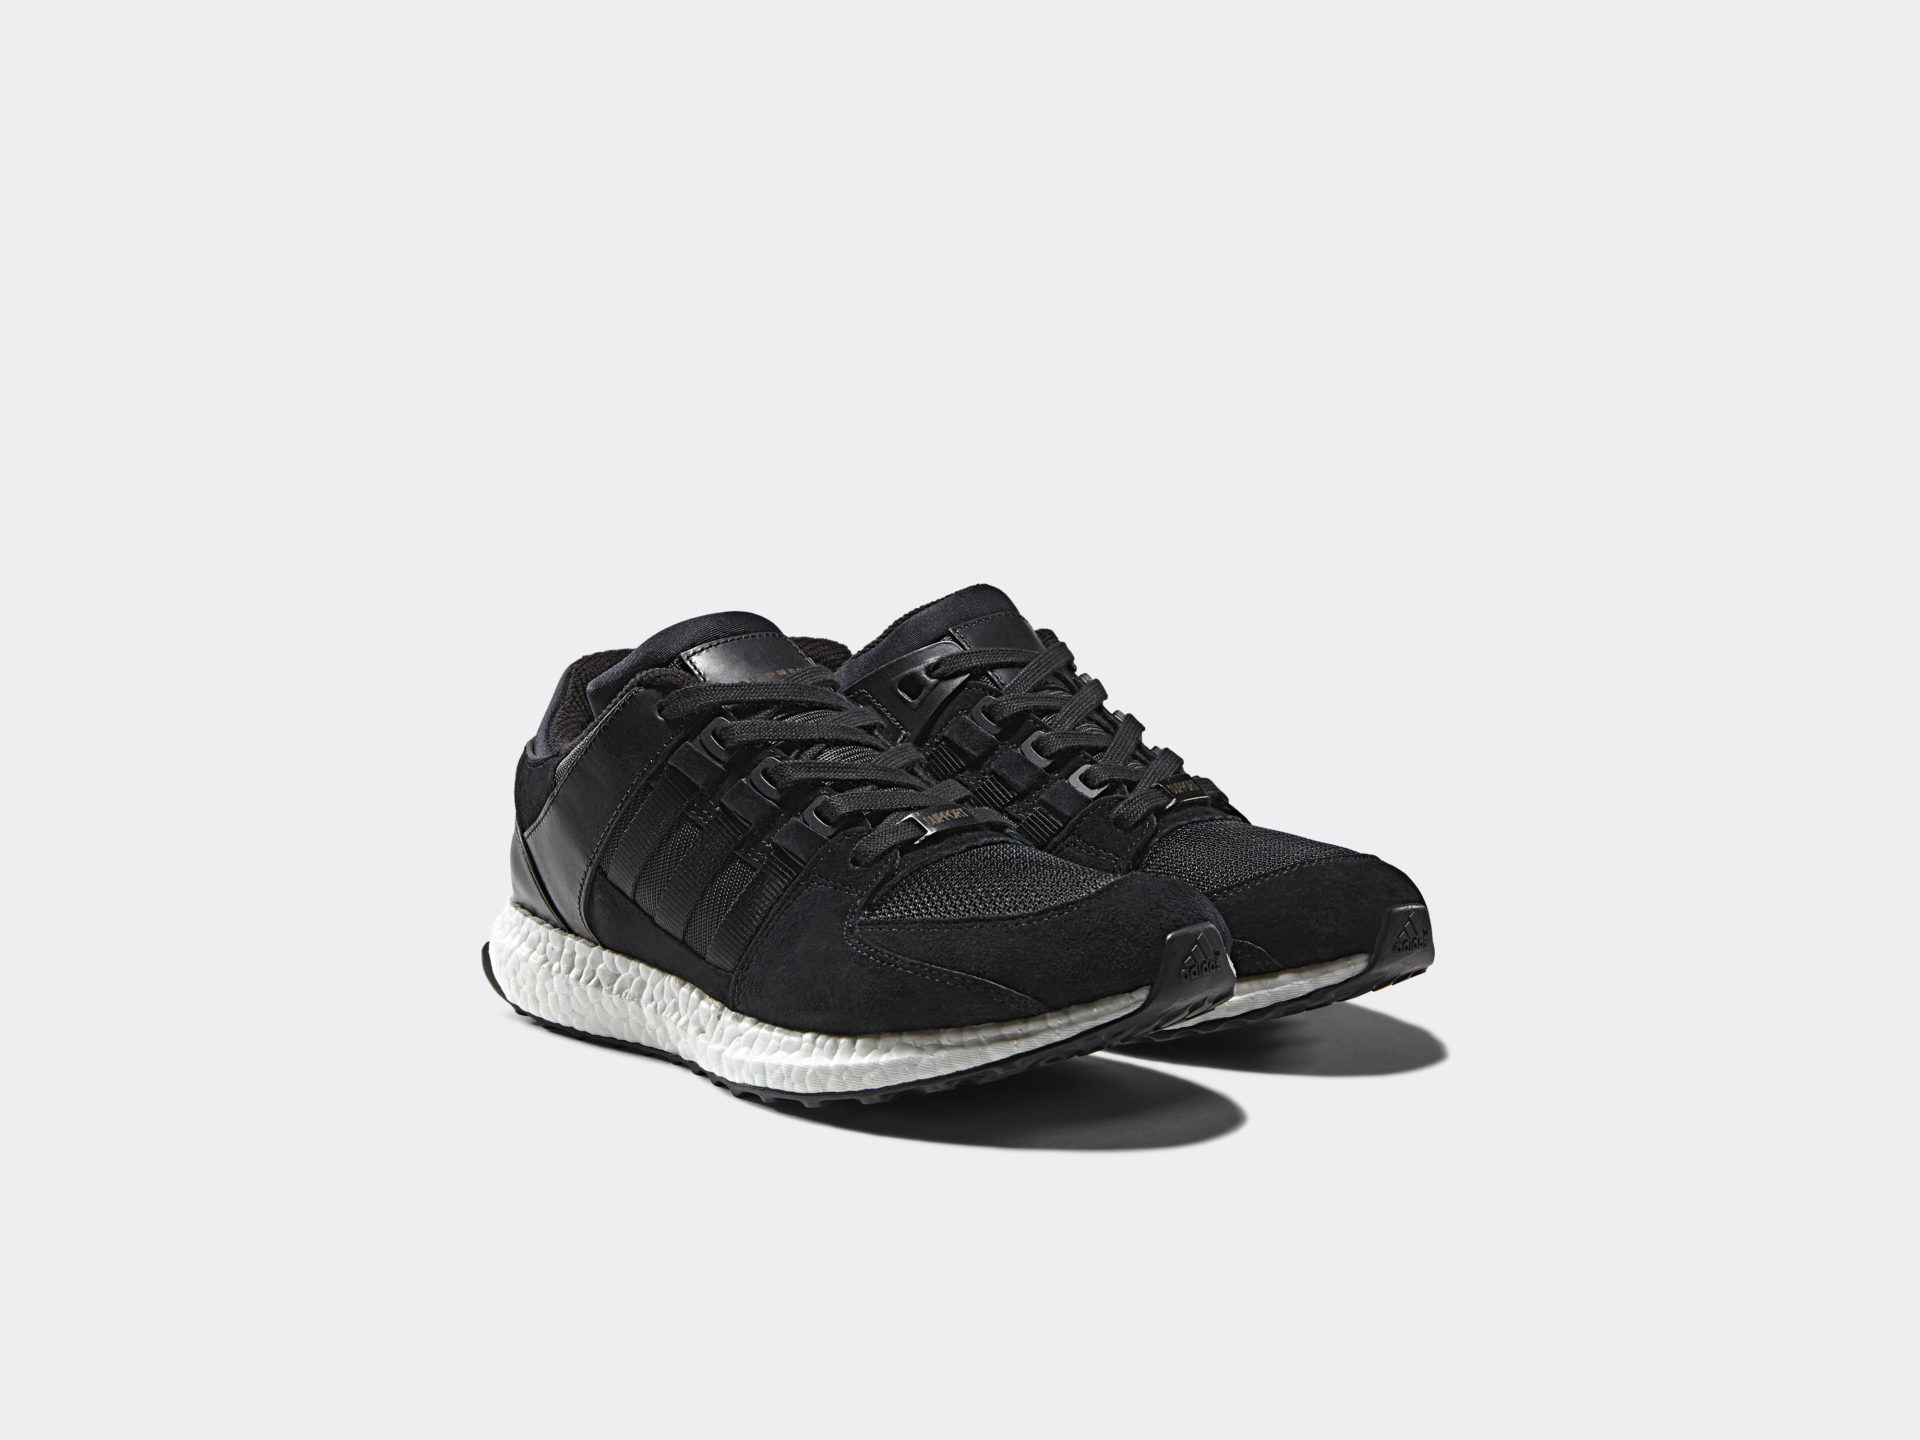 adidas EQT Support Ultra "Milled Leather"